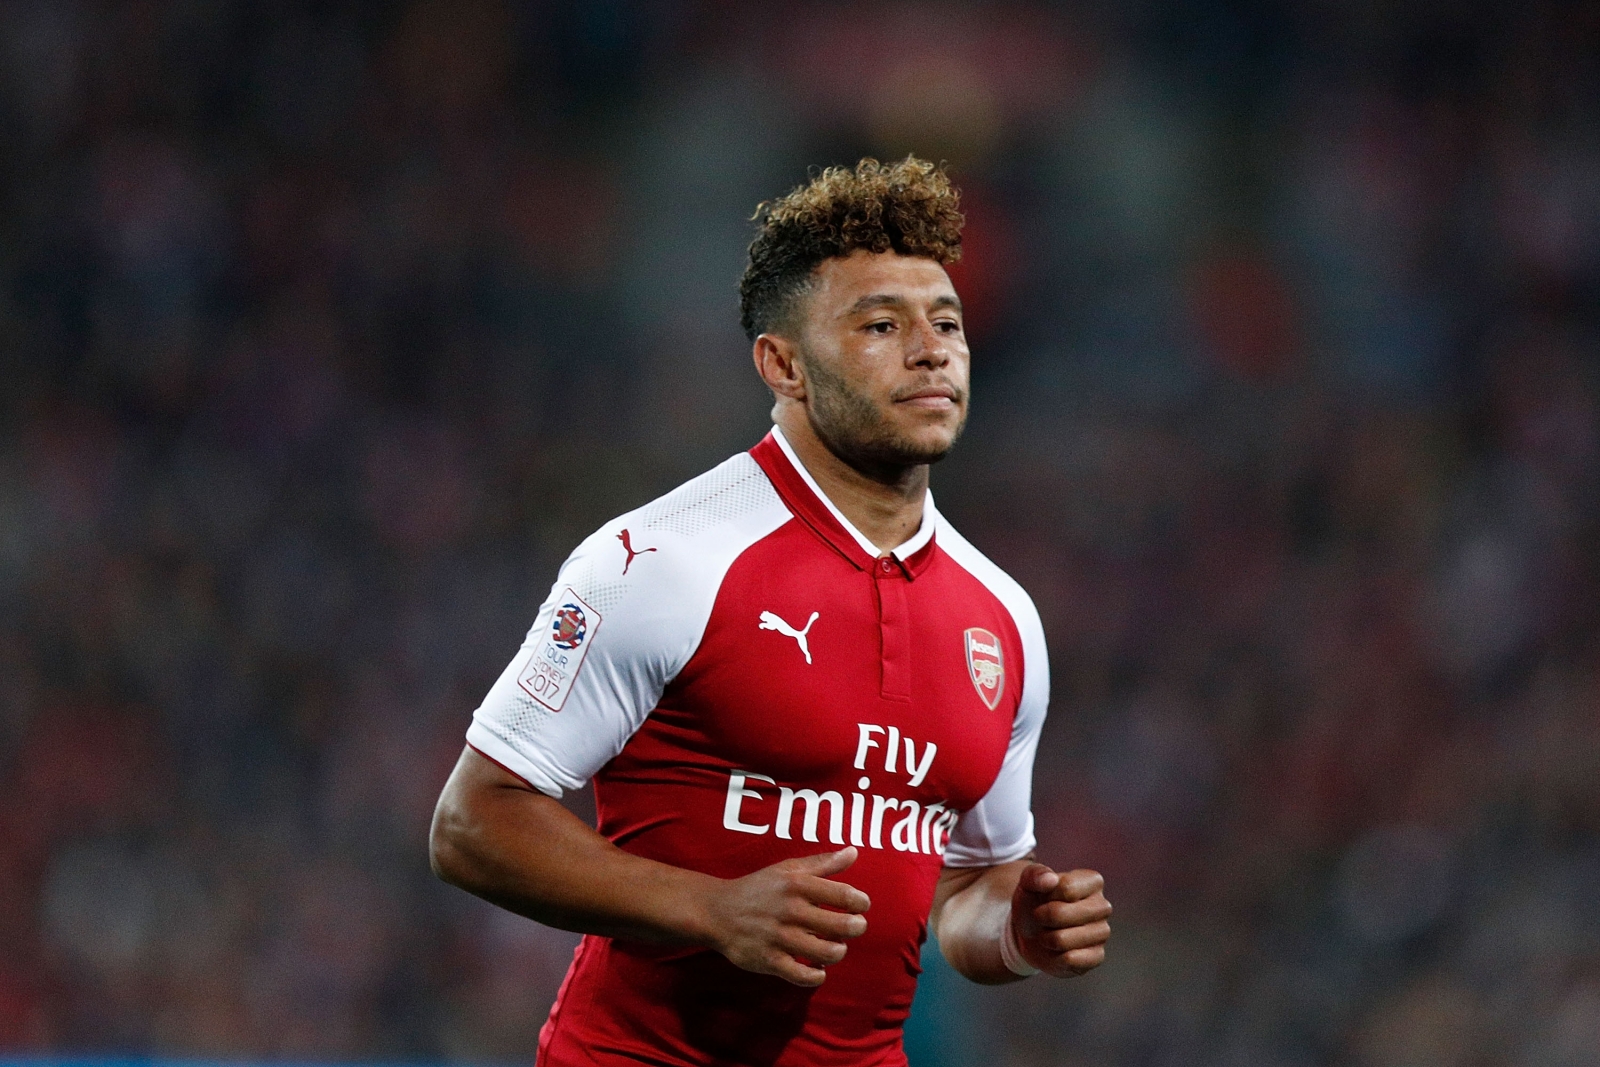 Arsene Wenger insists Alex Oxlade-Chamberlain will stay at Arsenal amid Liverpool interest1600 x 1067